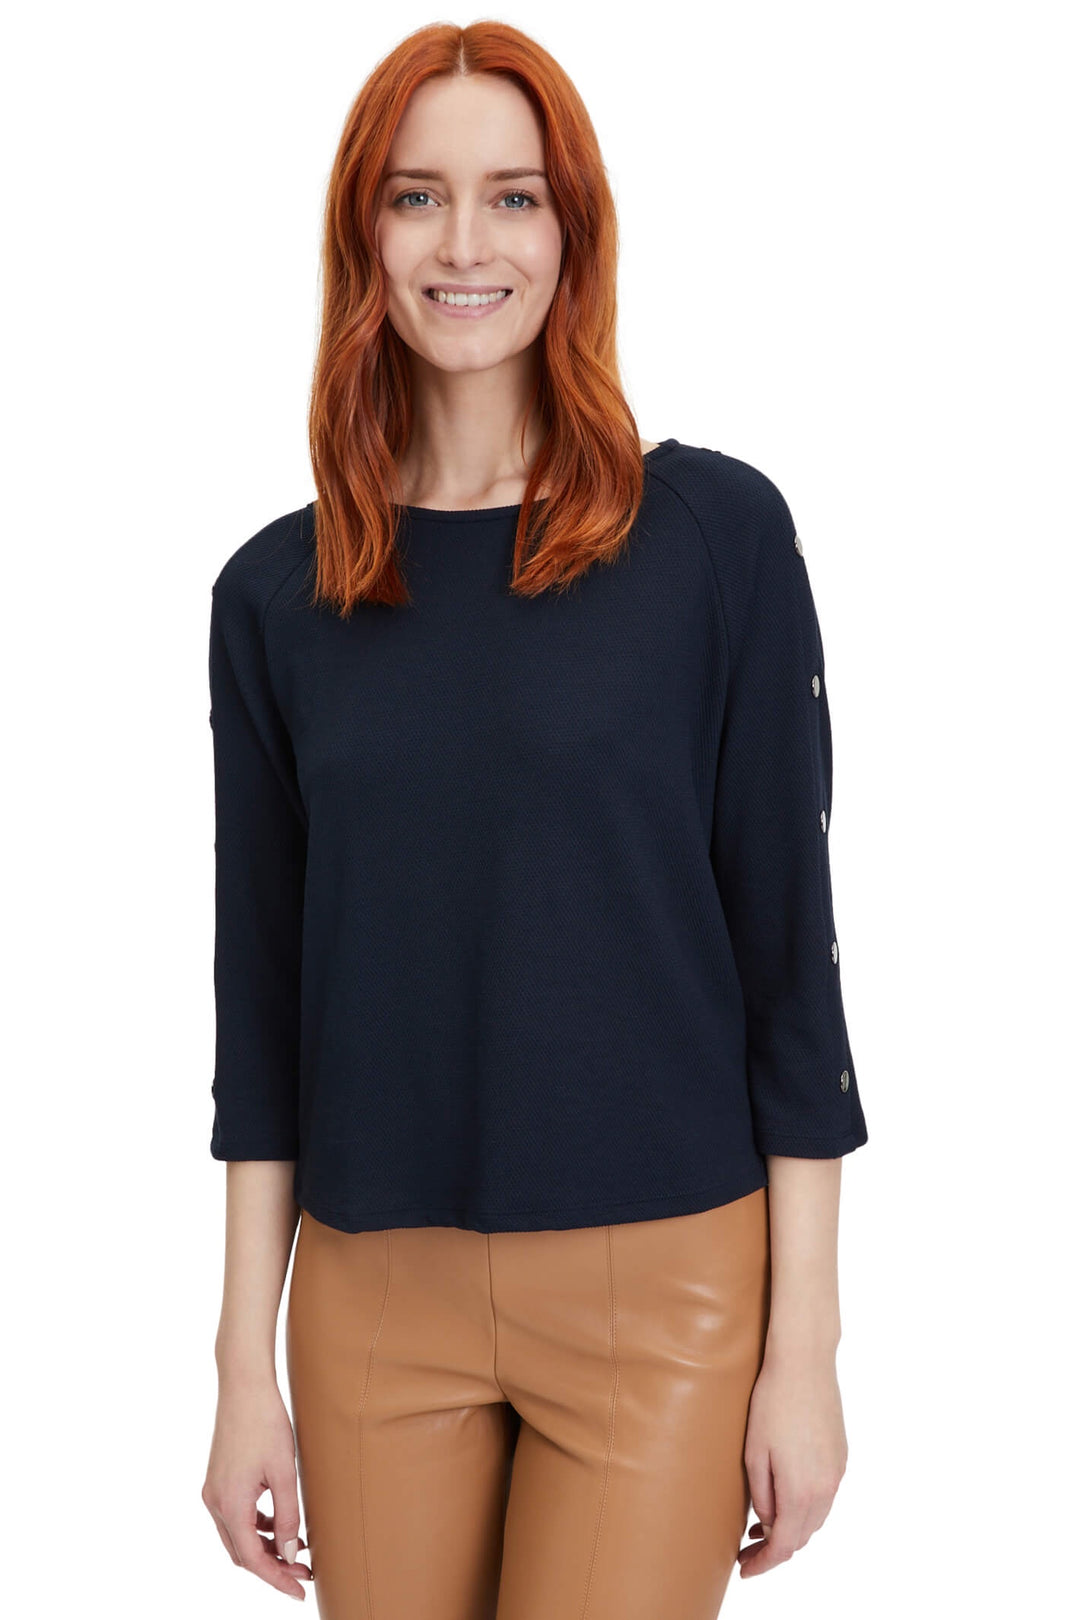 Betty Barclay 2913-2175 Navy 3/4 Sleeve Top With Button Detail On Arms - Dotique